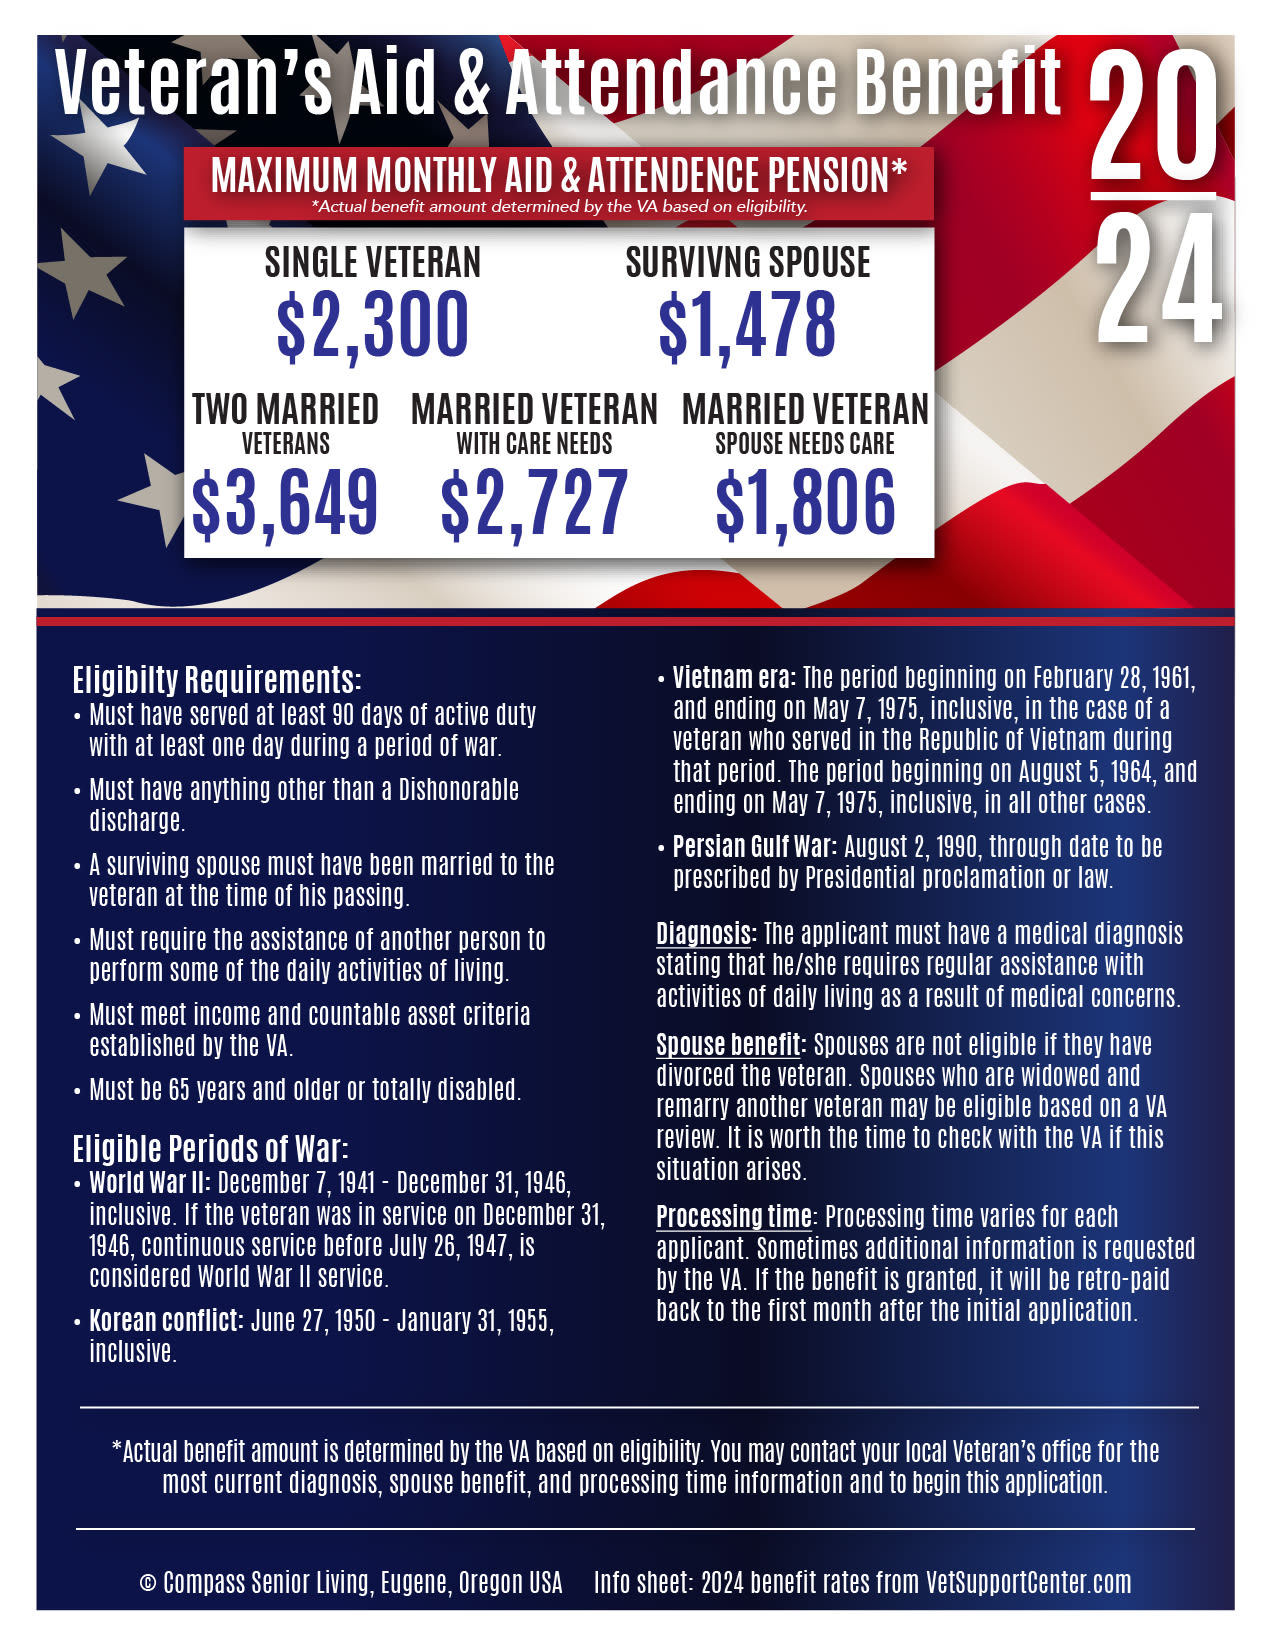 Veterans aid and attendance benefits info flyer at Majestic Rim Retirement Living